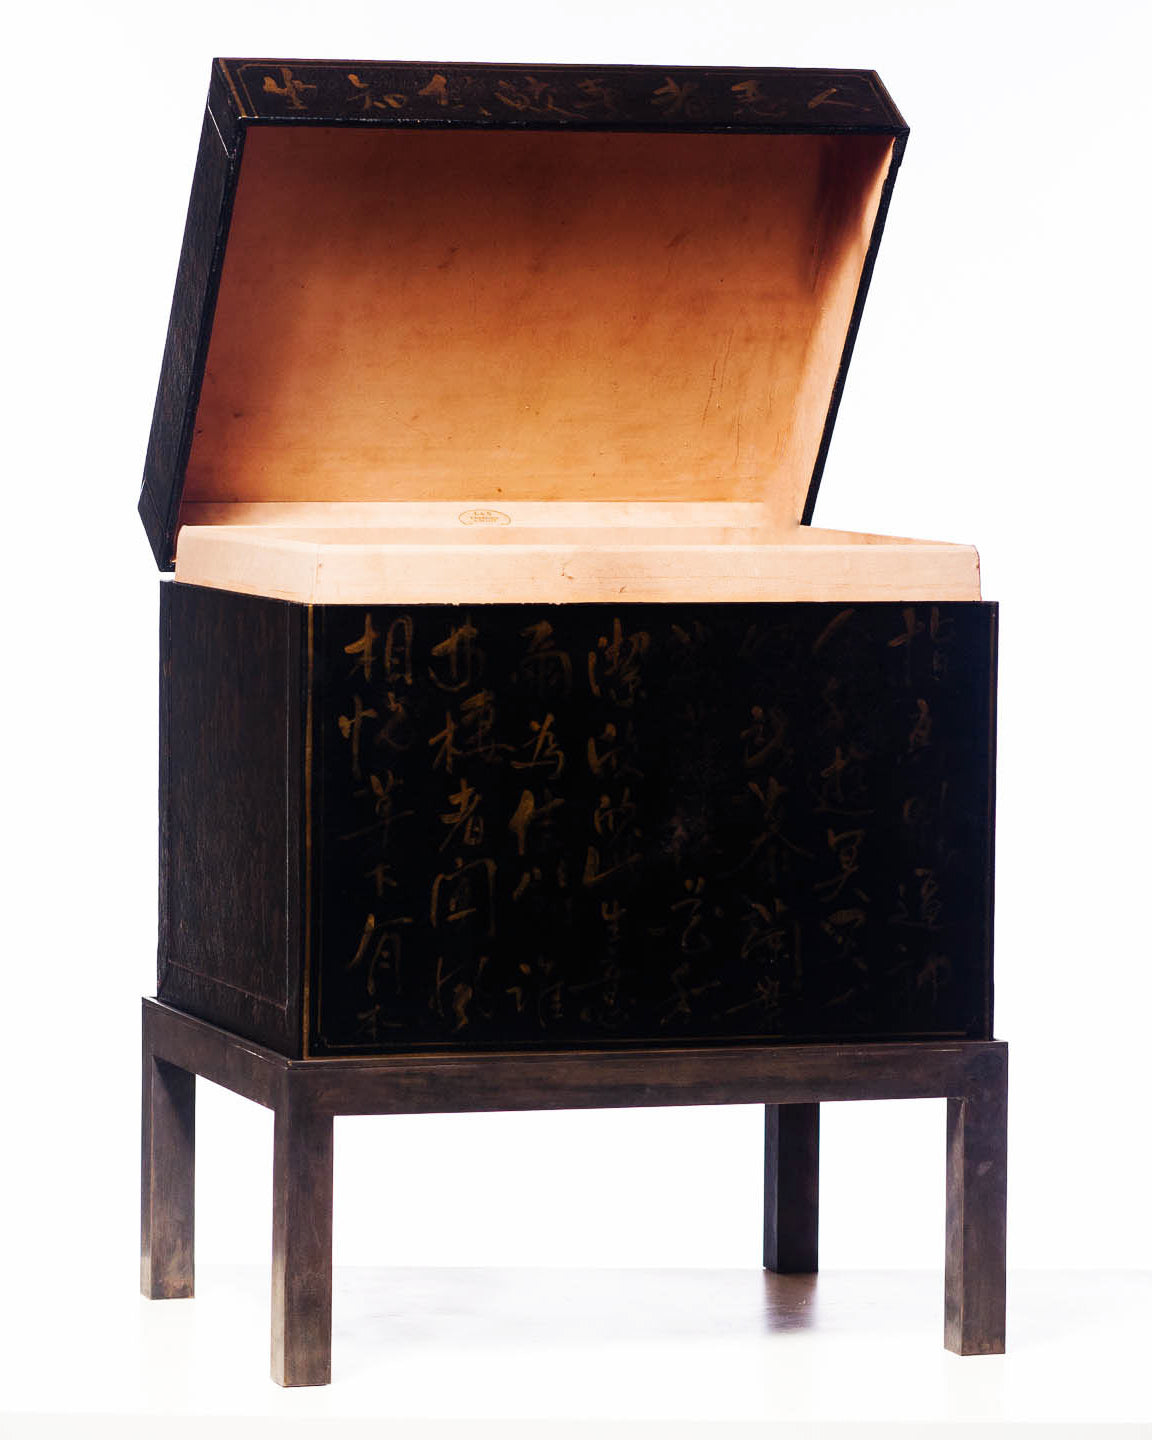 Black Inscription Leather Box (18.5") with Brass Stand